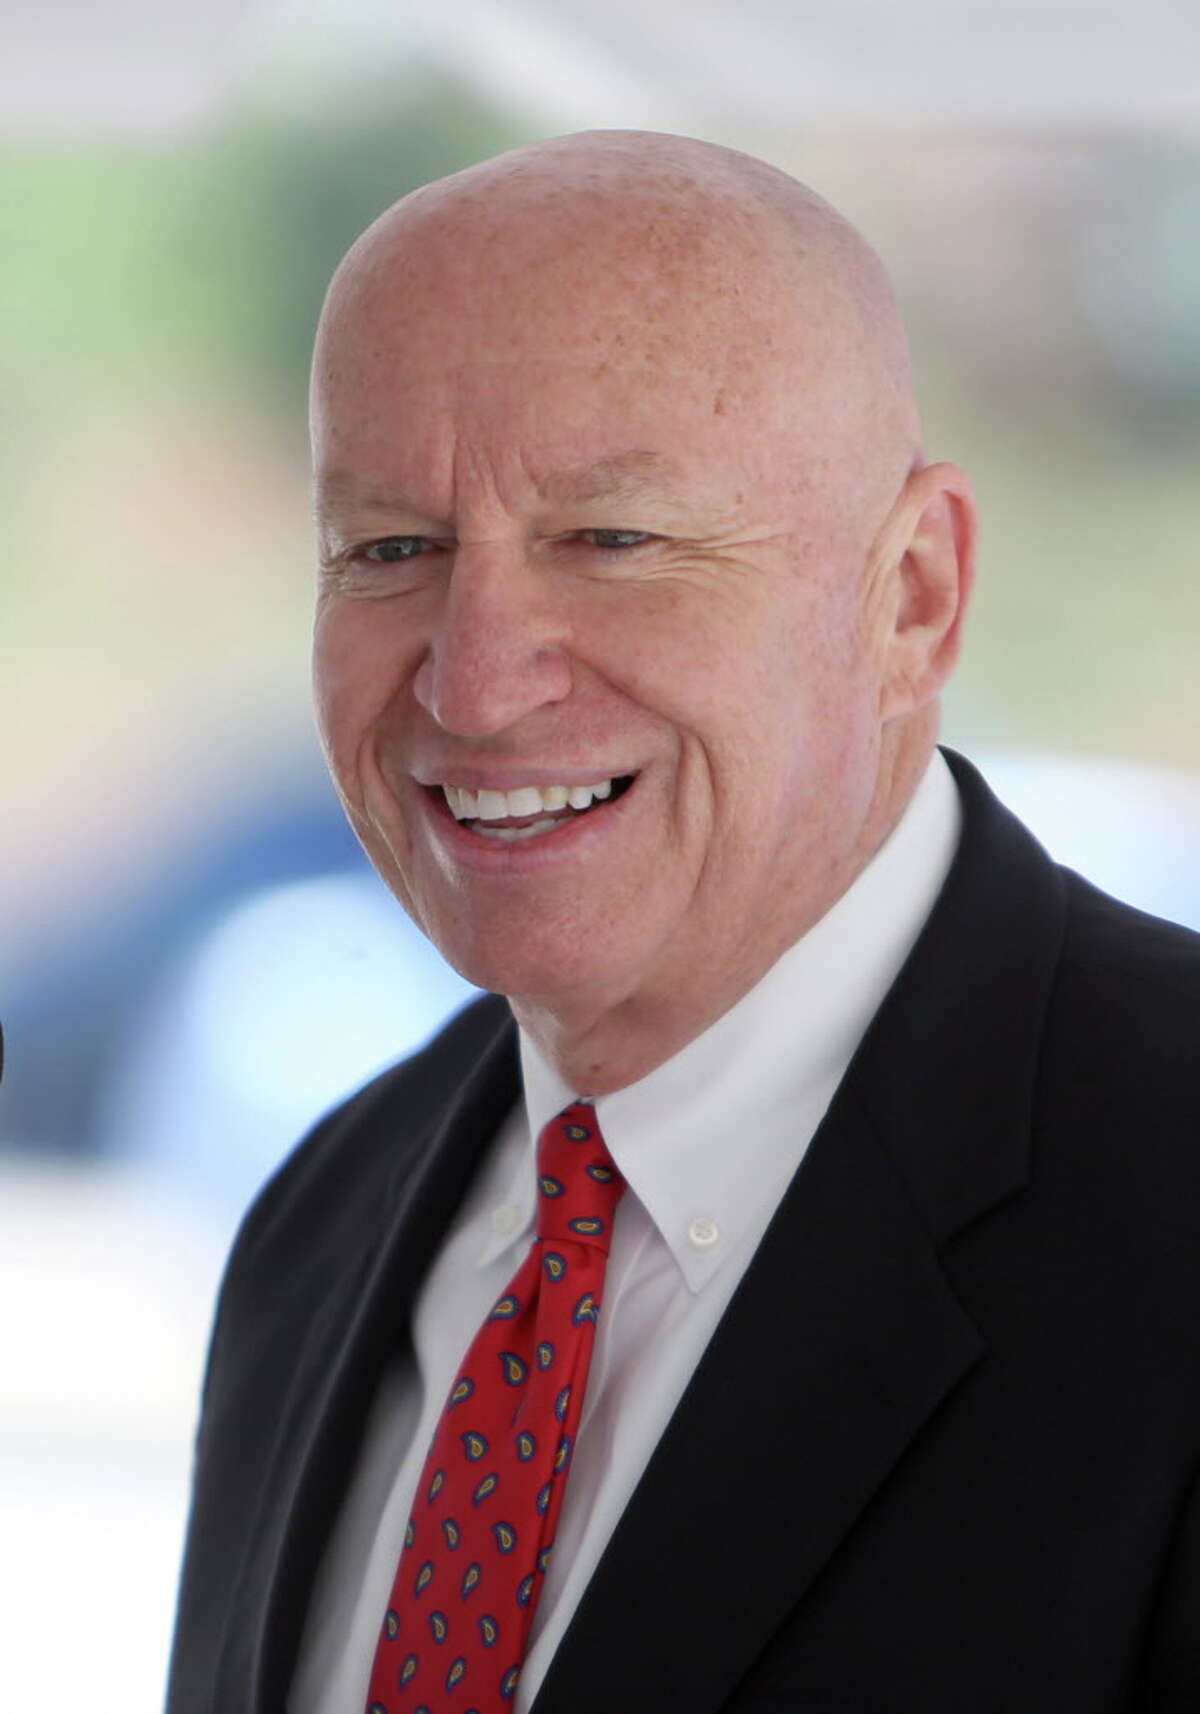 U.S. Rep. Kevin Brady at a ribbon cutting ceremony for the Veterans Affairs Outpatient Clinic Friday, Dec. 4, 2015, in Conroe, Texas. ( Gary Coronado / Houston Chronicle )